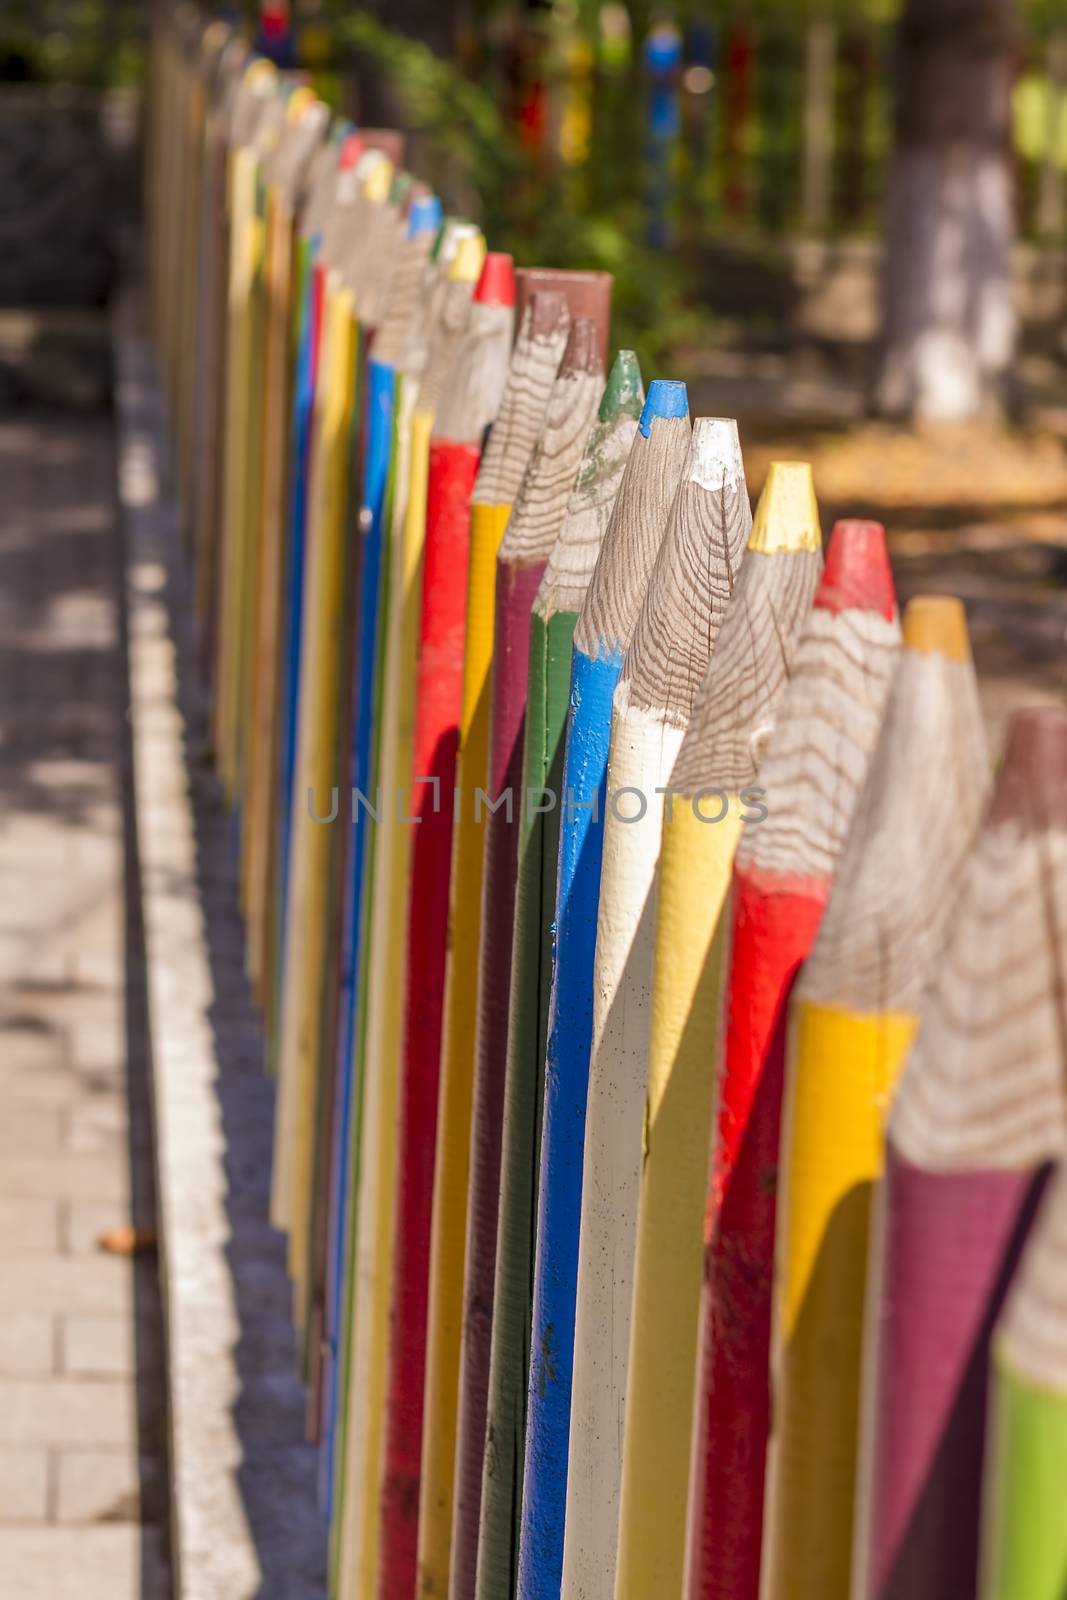 Fence of colourful pencils by manaemedia